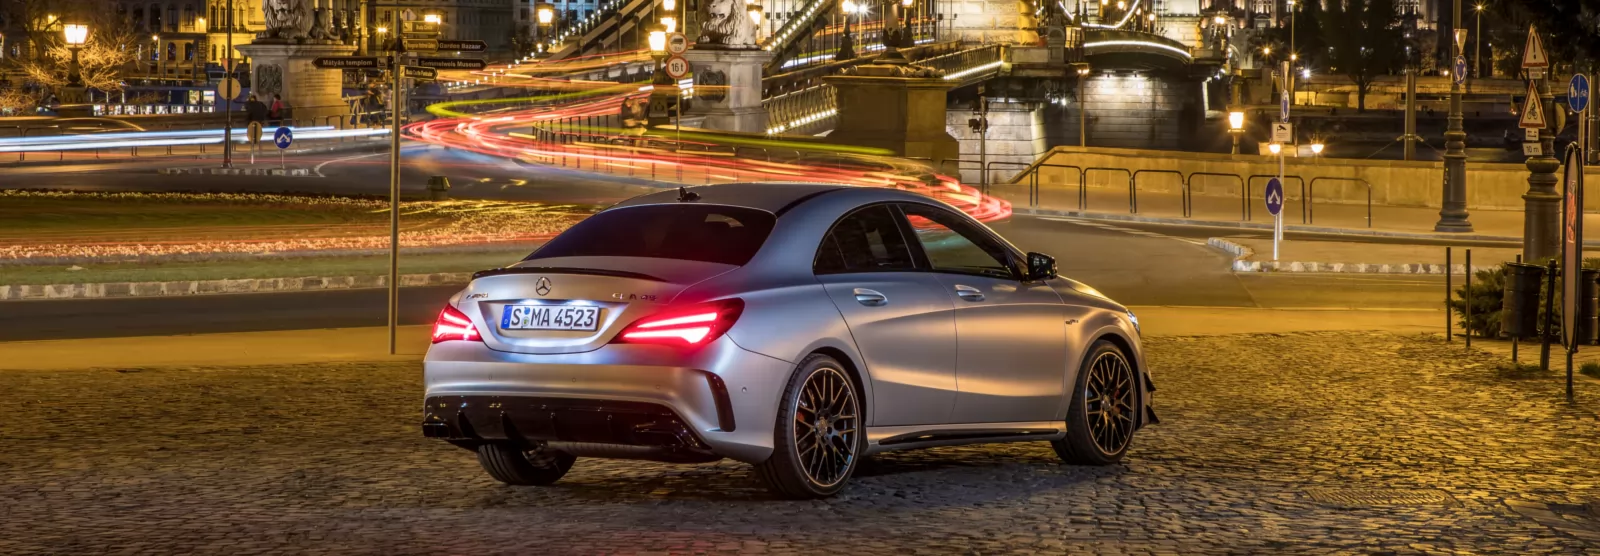 Lateral mercedes cla